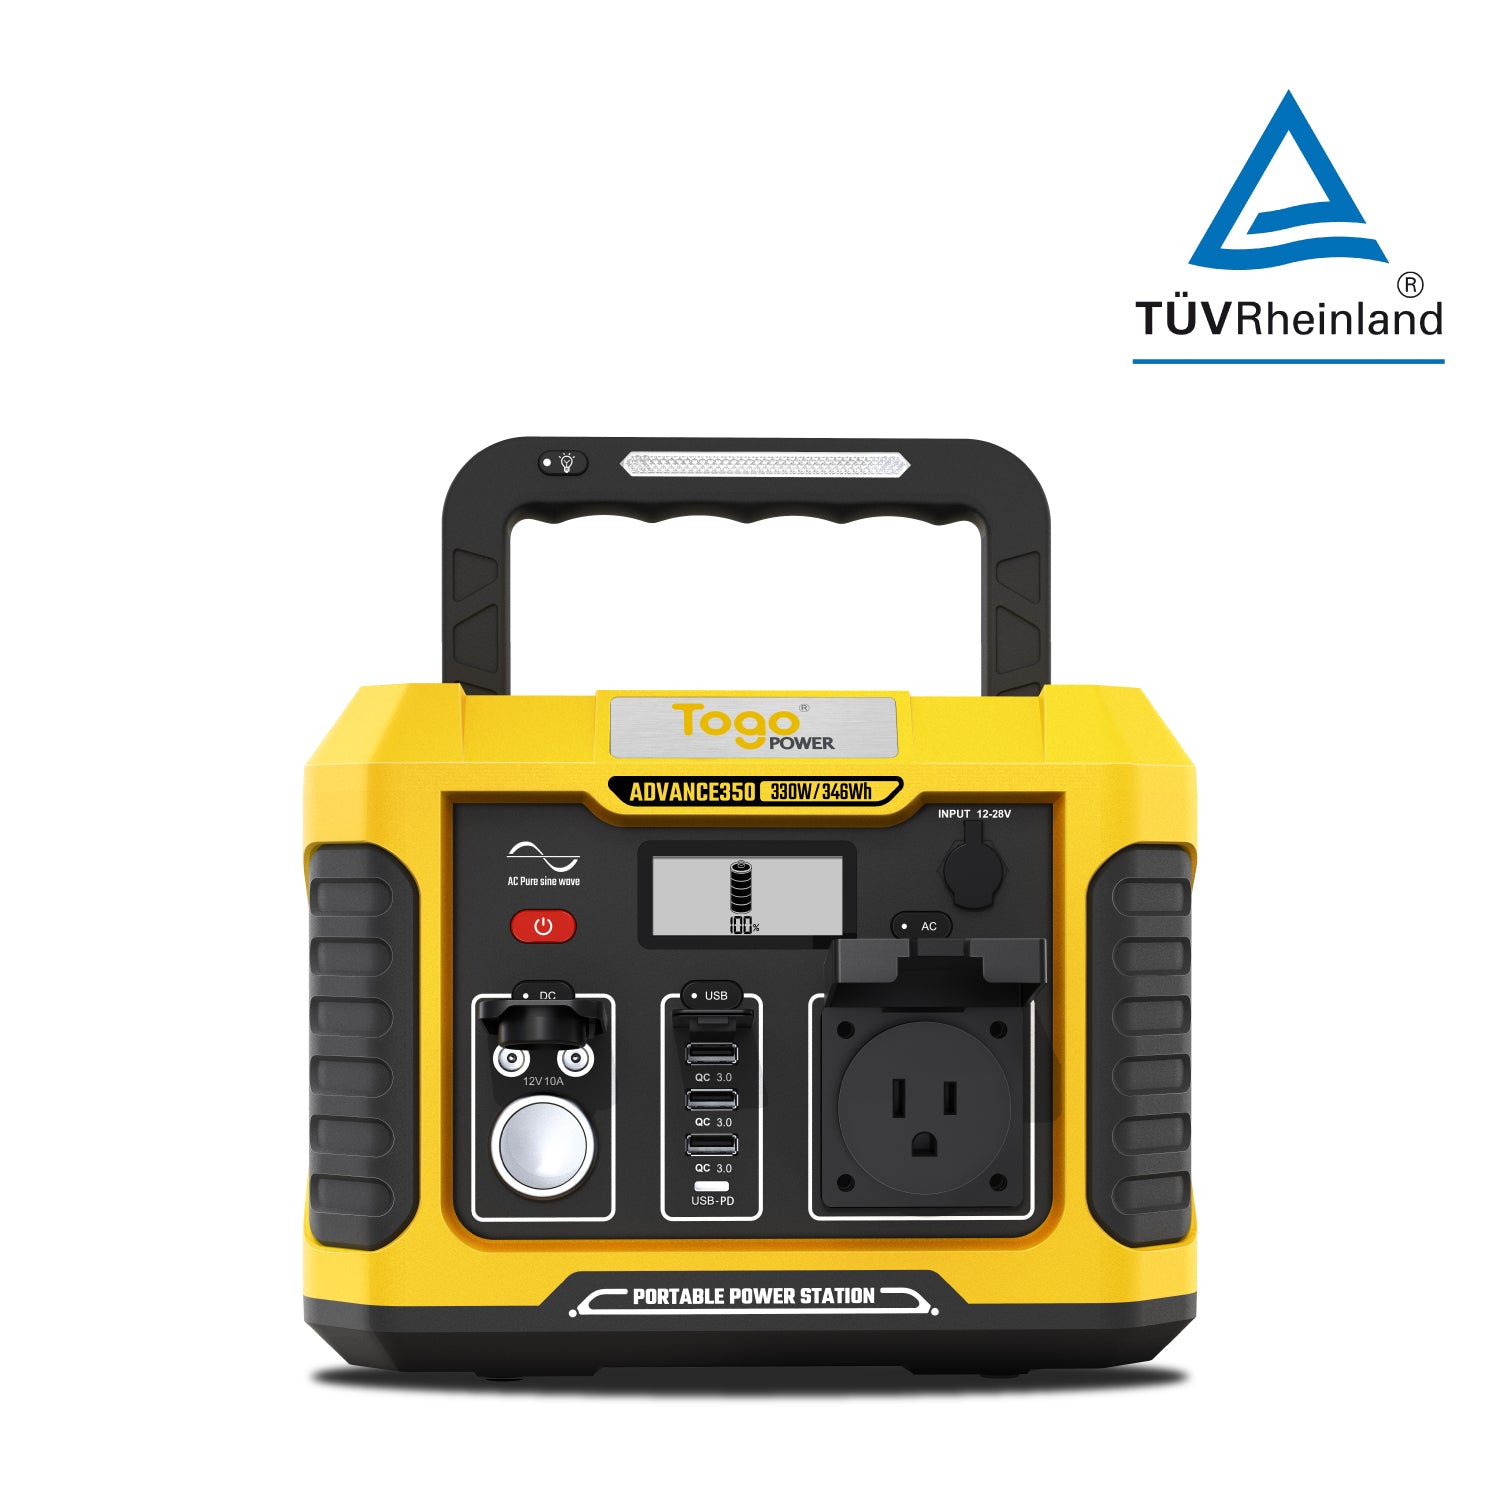 TogoPower Launched The World's Lightest 1000W Portable Power Station –  Togopower